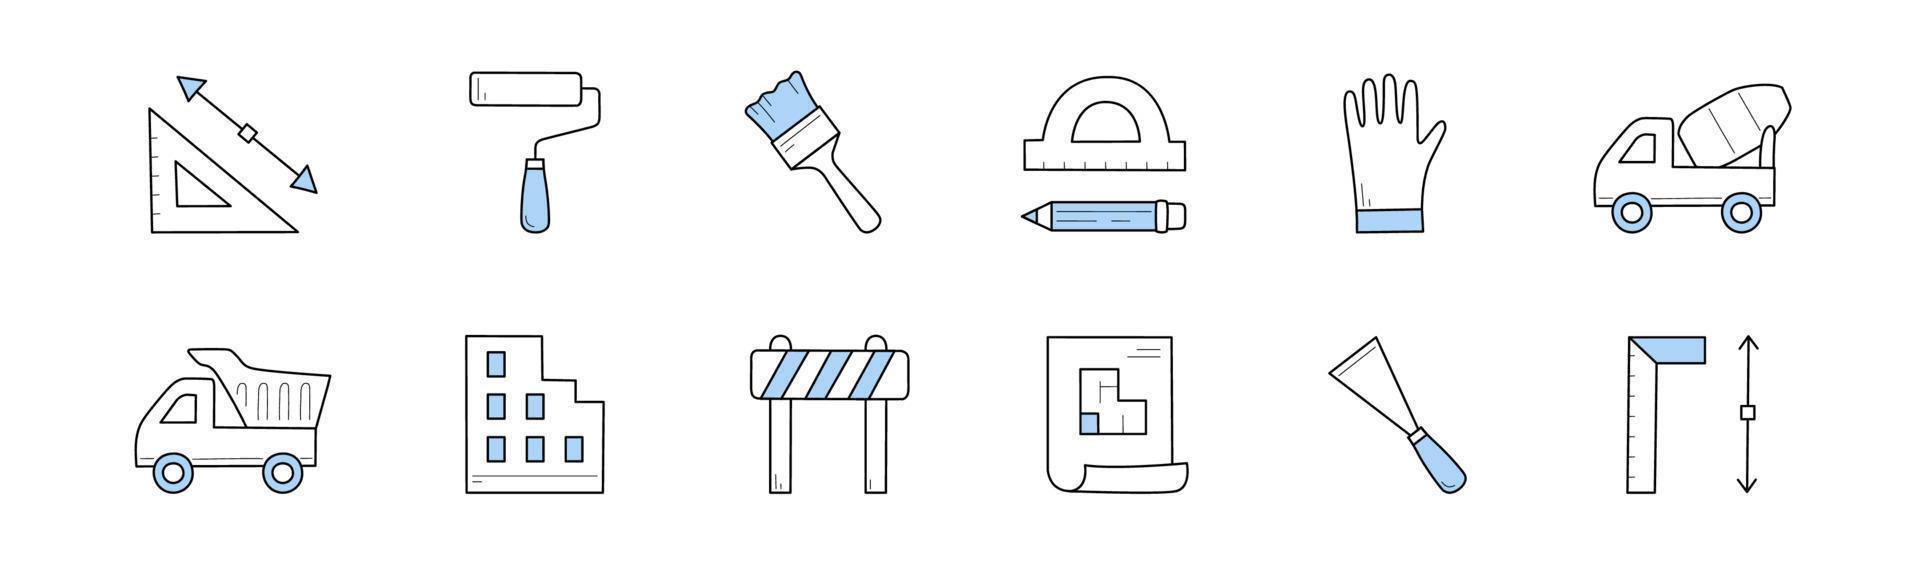 Construction, building doodle icons, vector signs